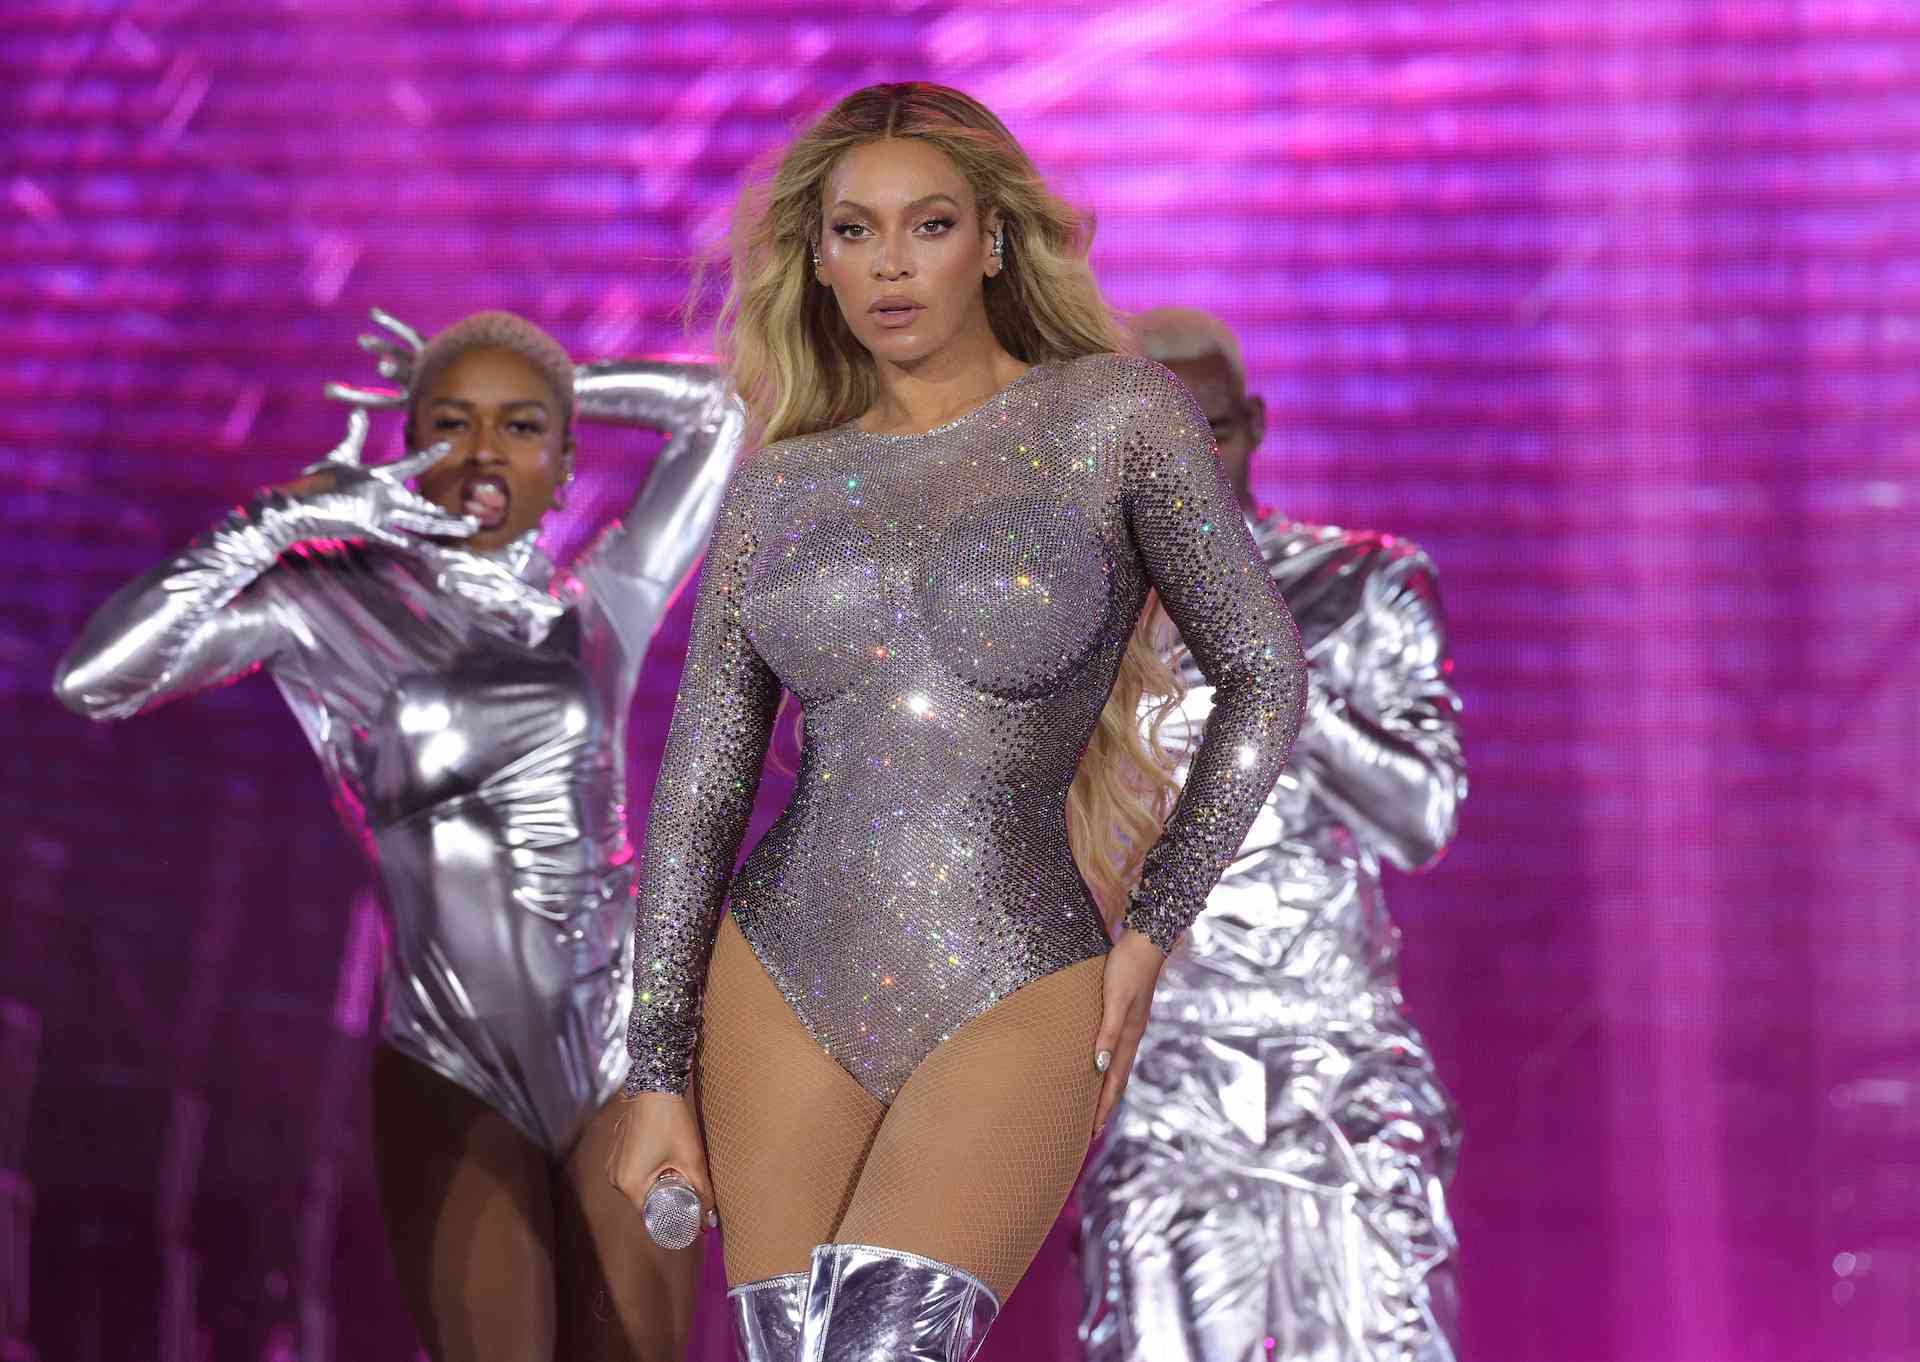 Spilling the tea on Beyoncé's Chicago real estate rumblings, this deep dive explores if the Windy City may influence Queen Bey's net worth. Read about her potential mansion mastery!